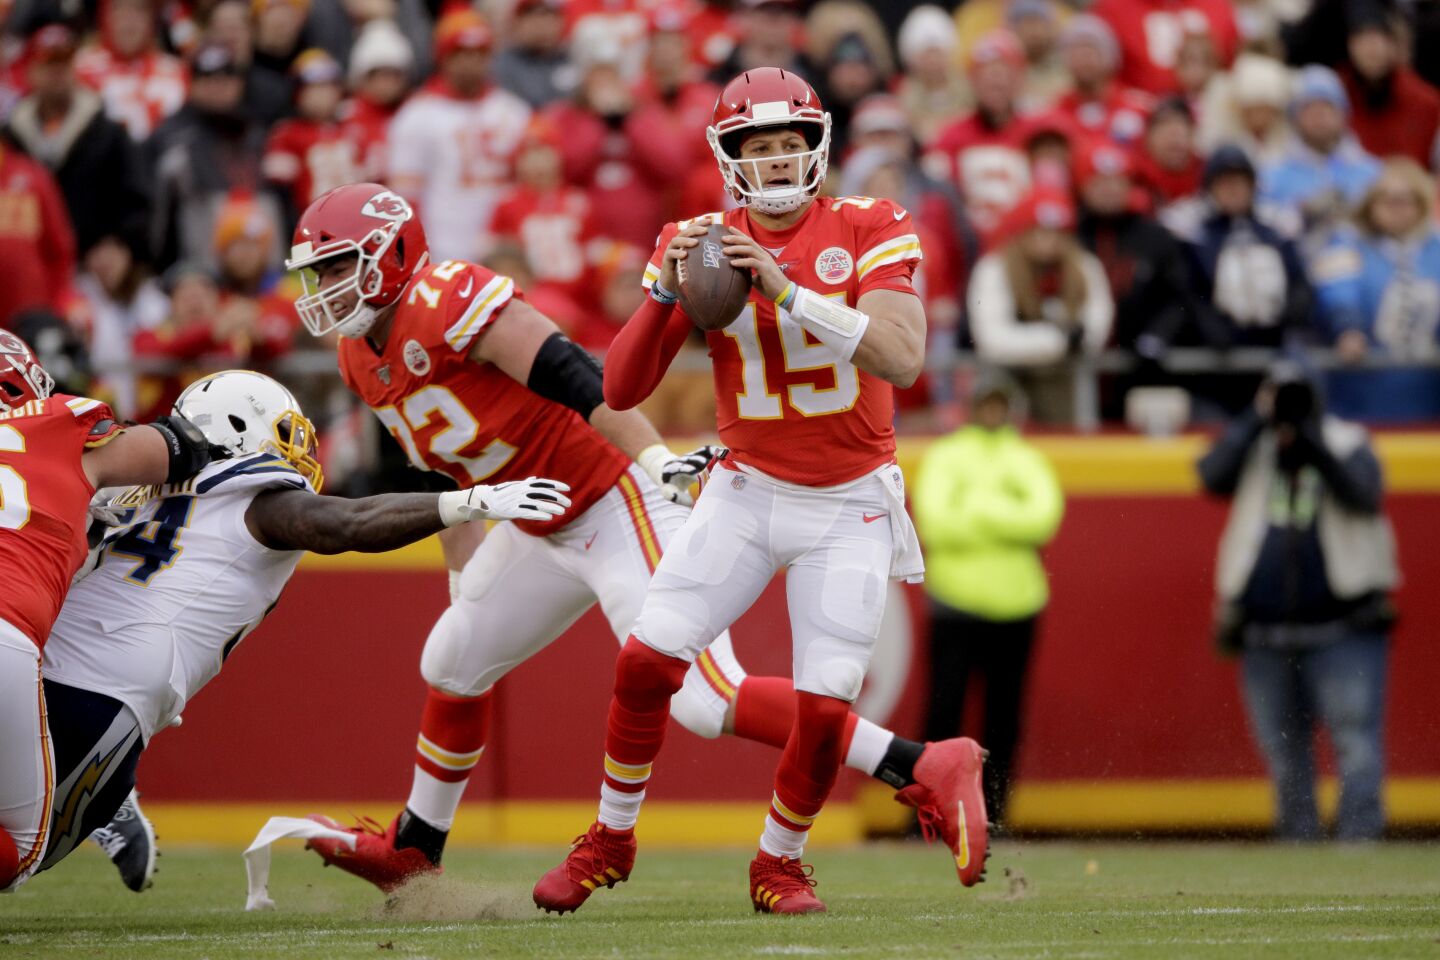 Chiefs quarterback Patrick Mahomes (15) looks to throw during a game against the Chargers on Dec. 29.